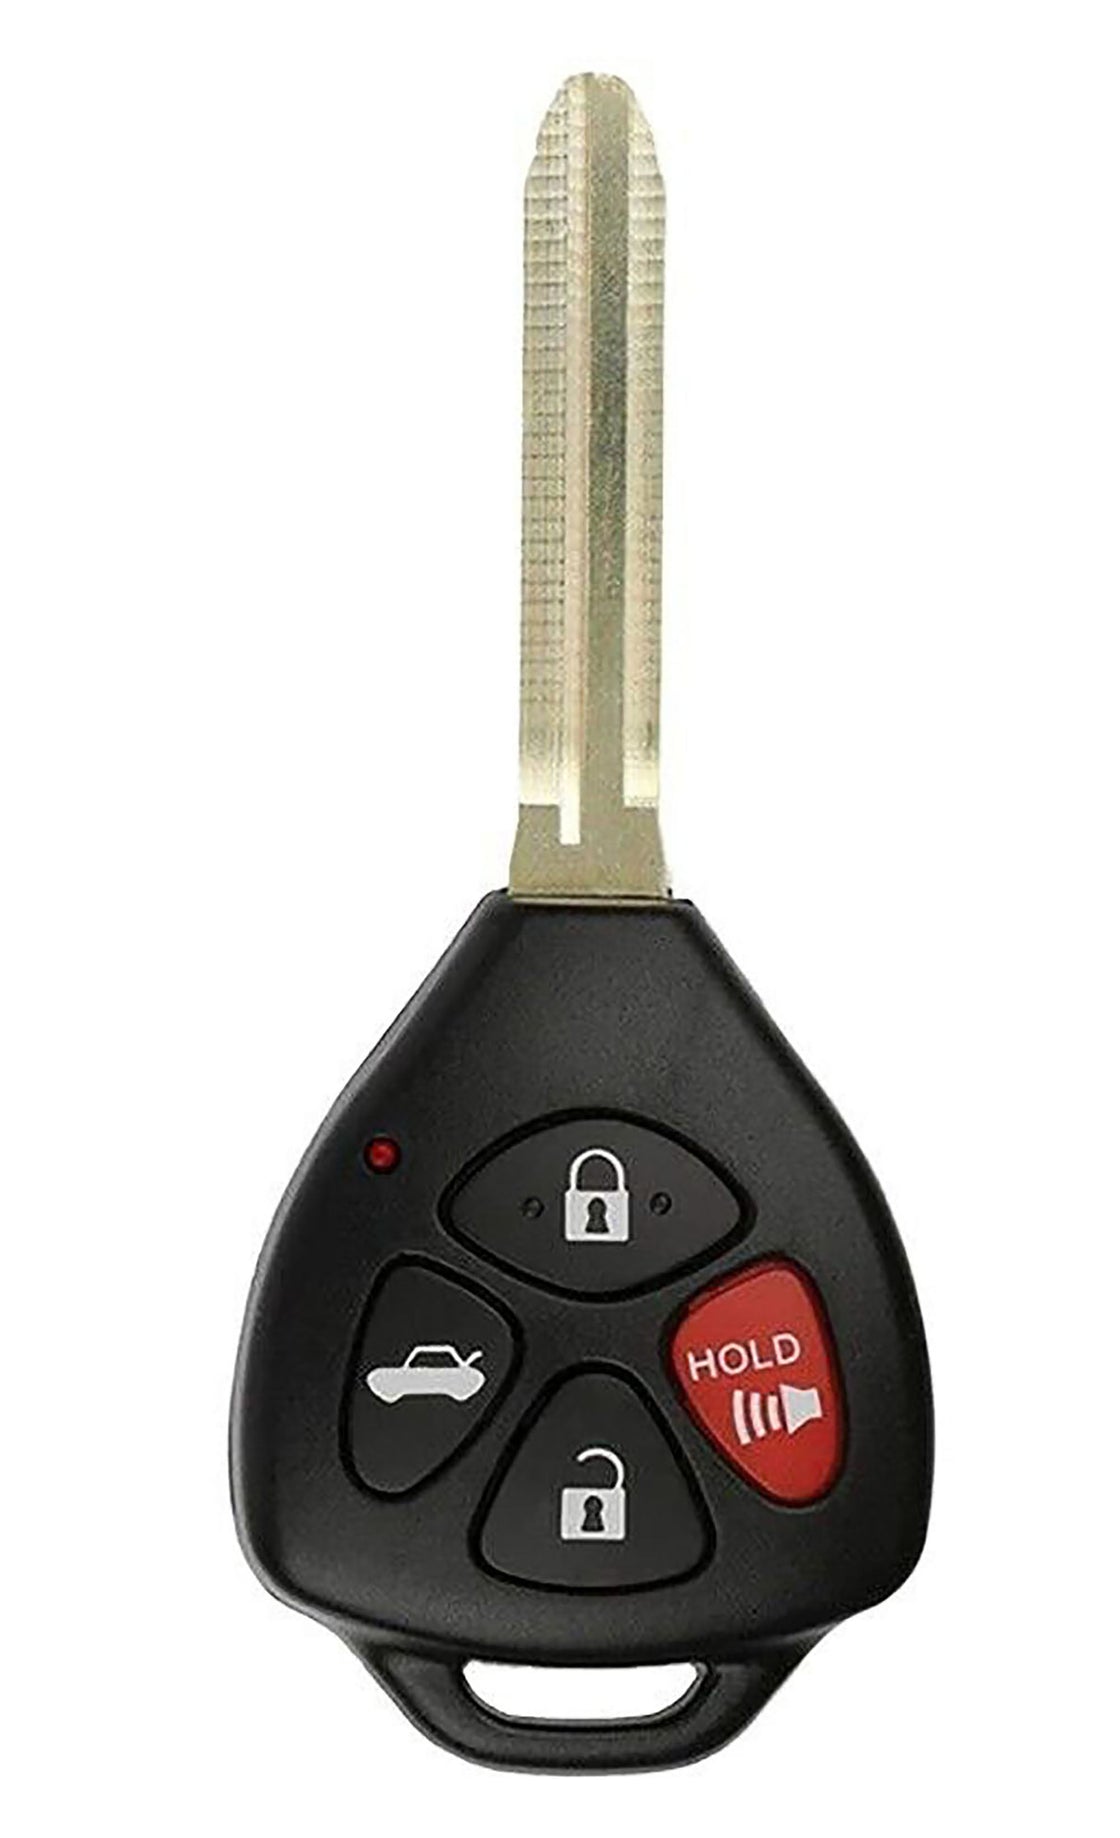 2010 Toyota Corolla Replacement Key Fob Remote